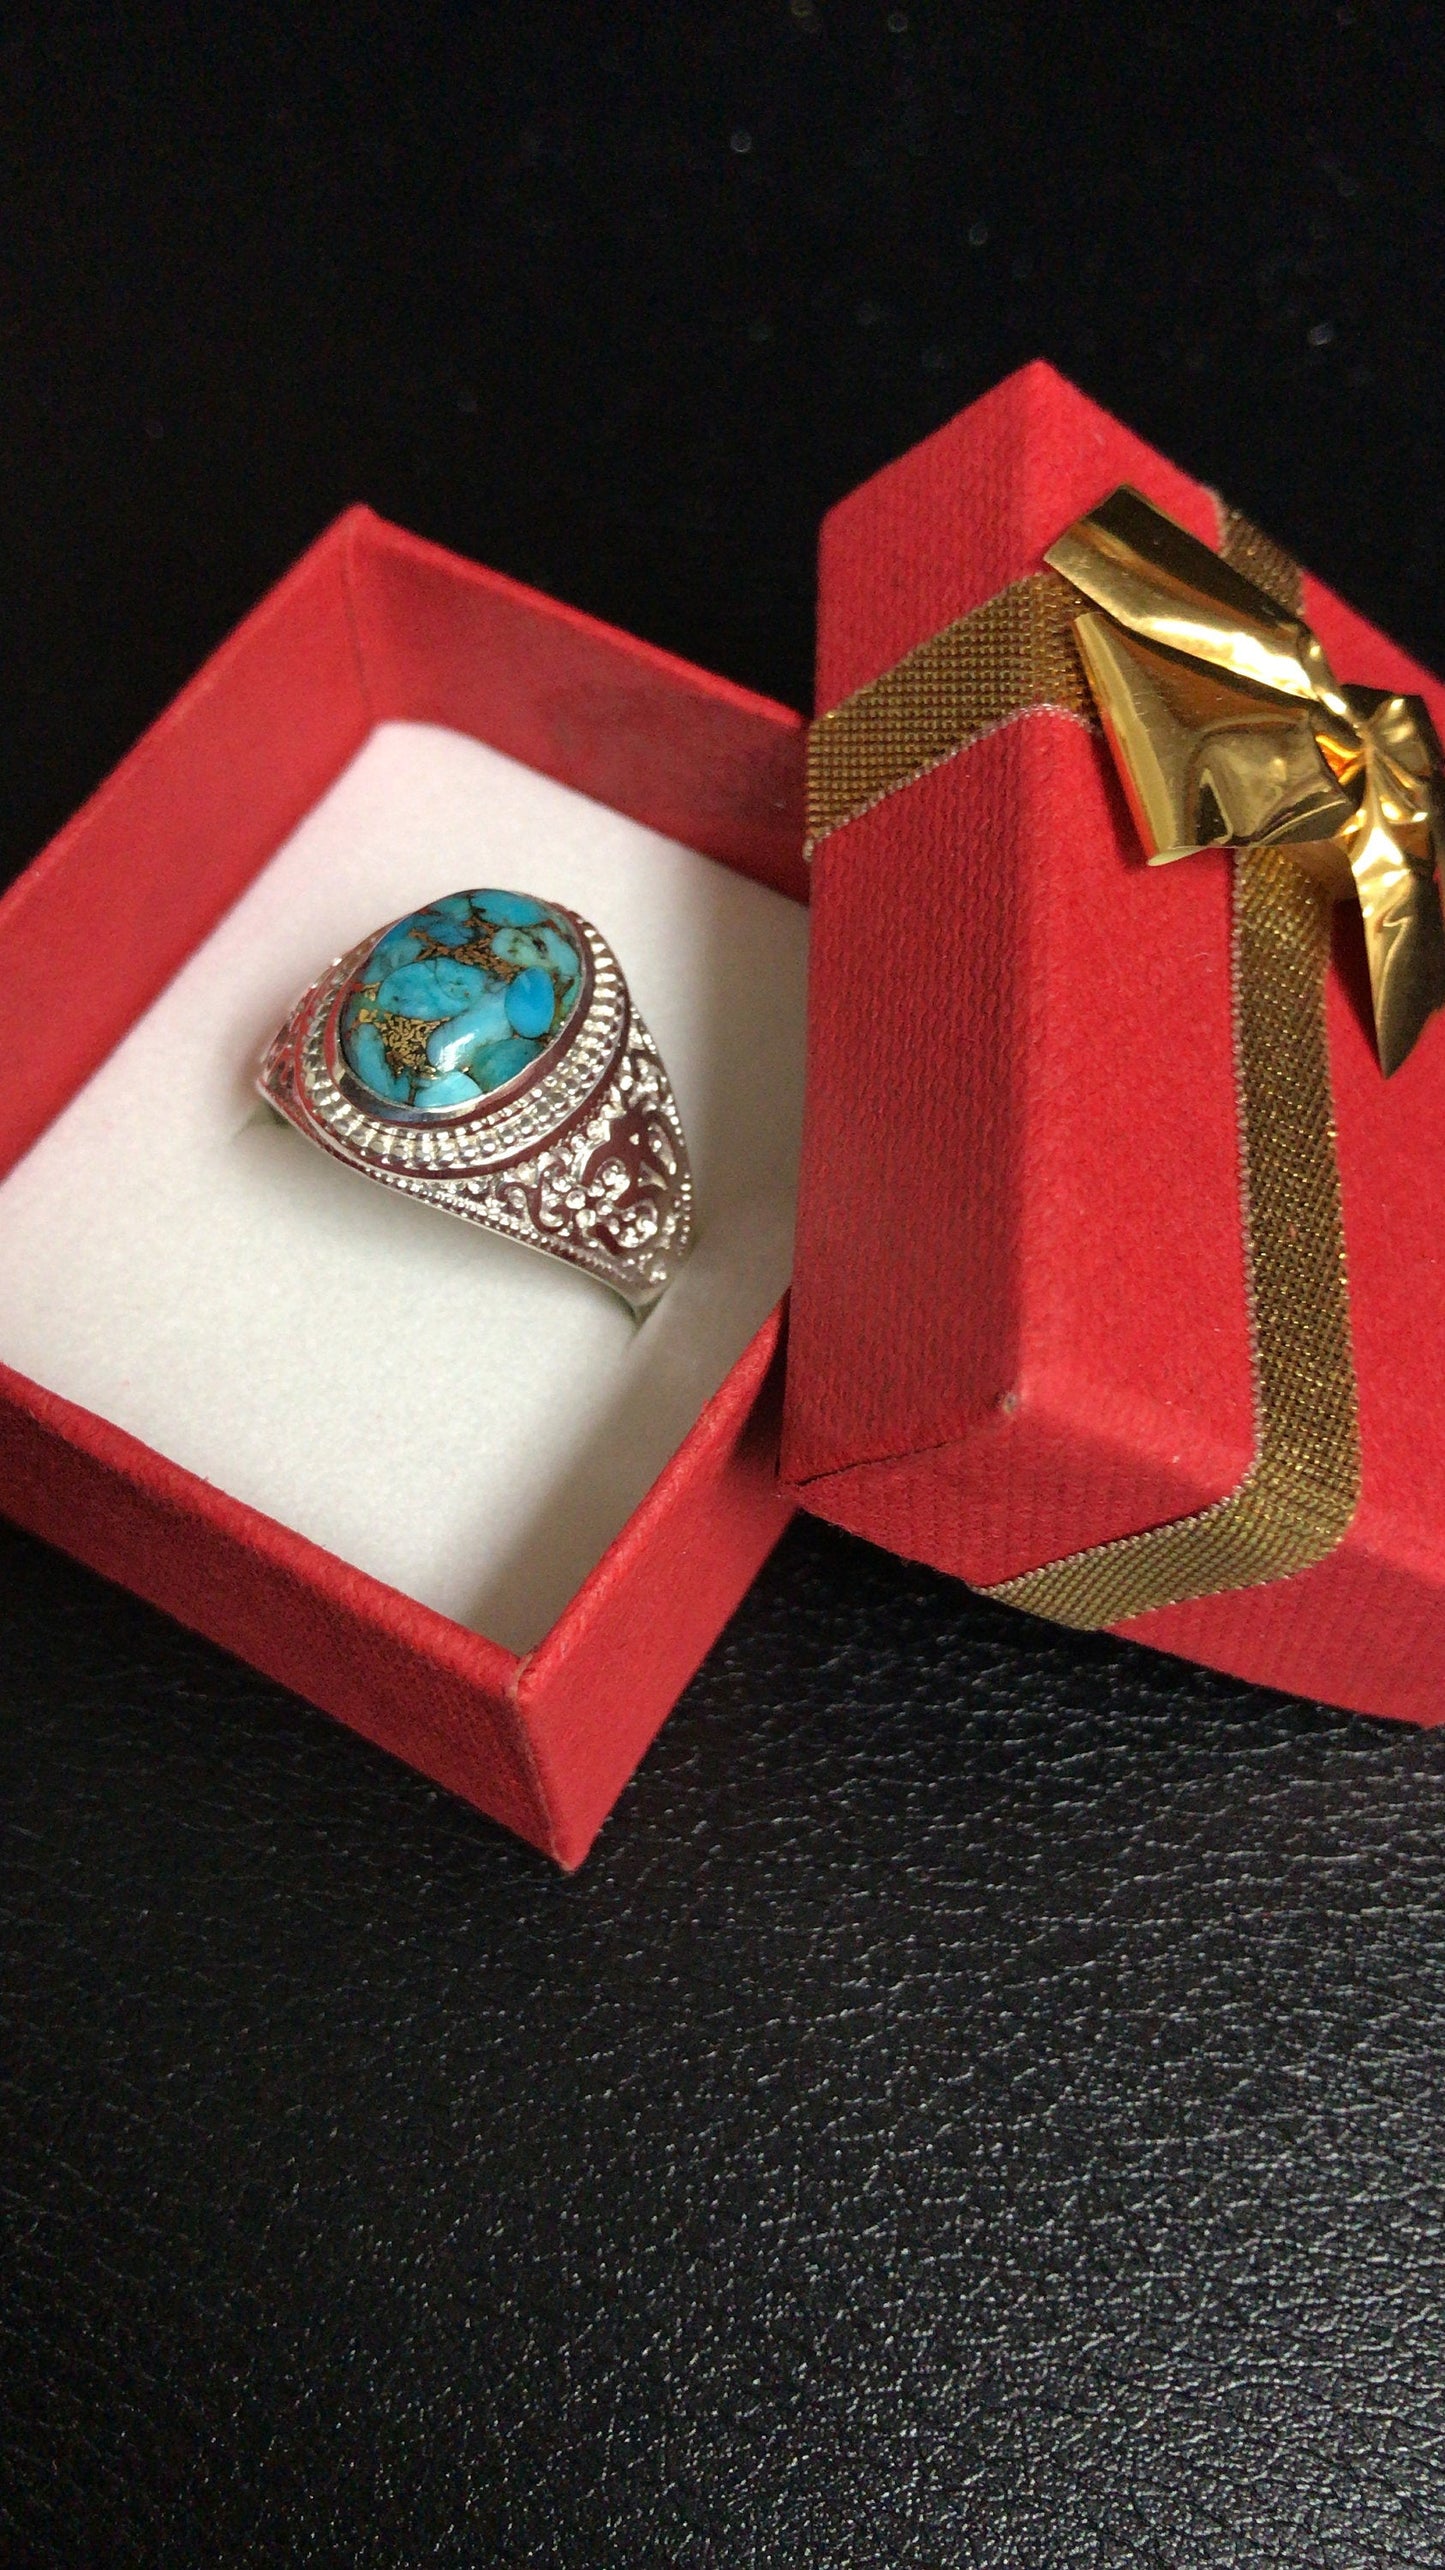 Sterling Silver Om (Aum) Mantra Ring with Blue Copper Turquoise Karma Blingz